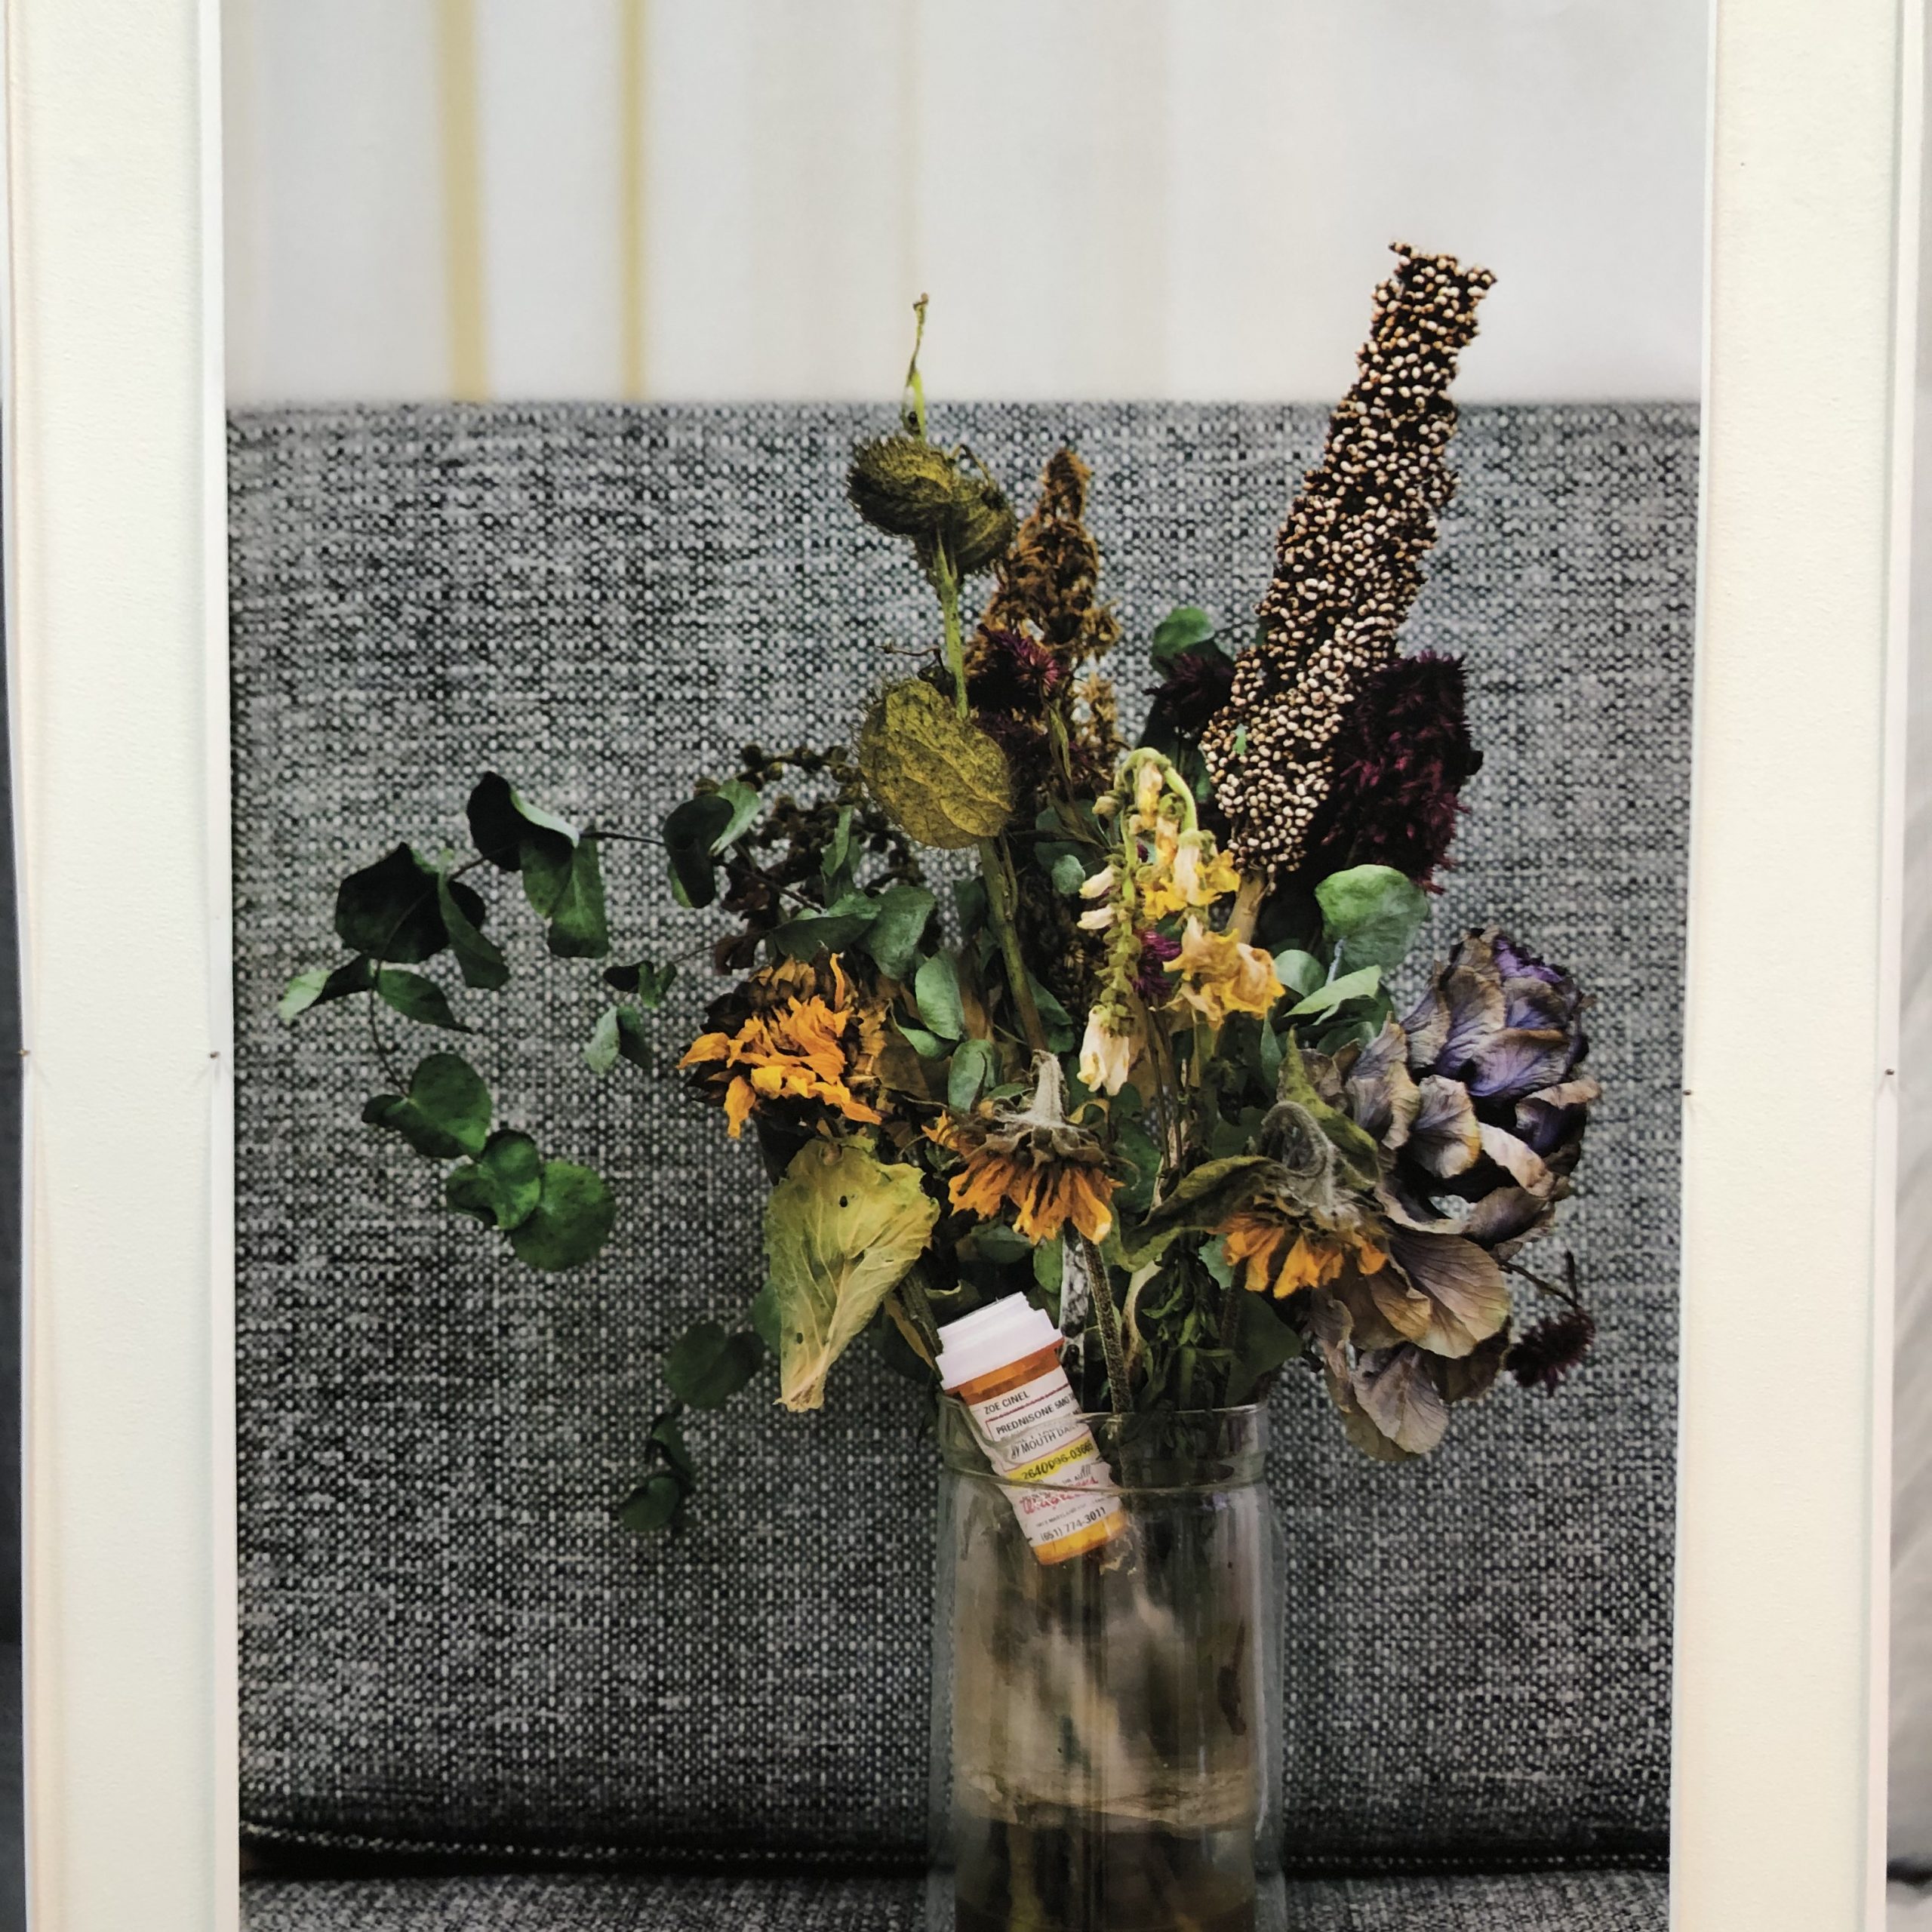 detail of photo with dying flowers and medicine bottle